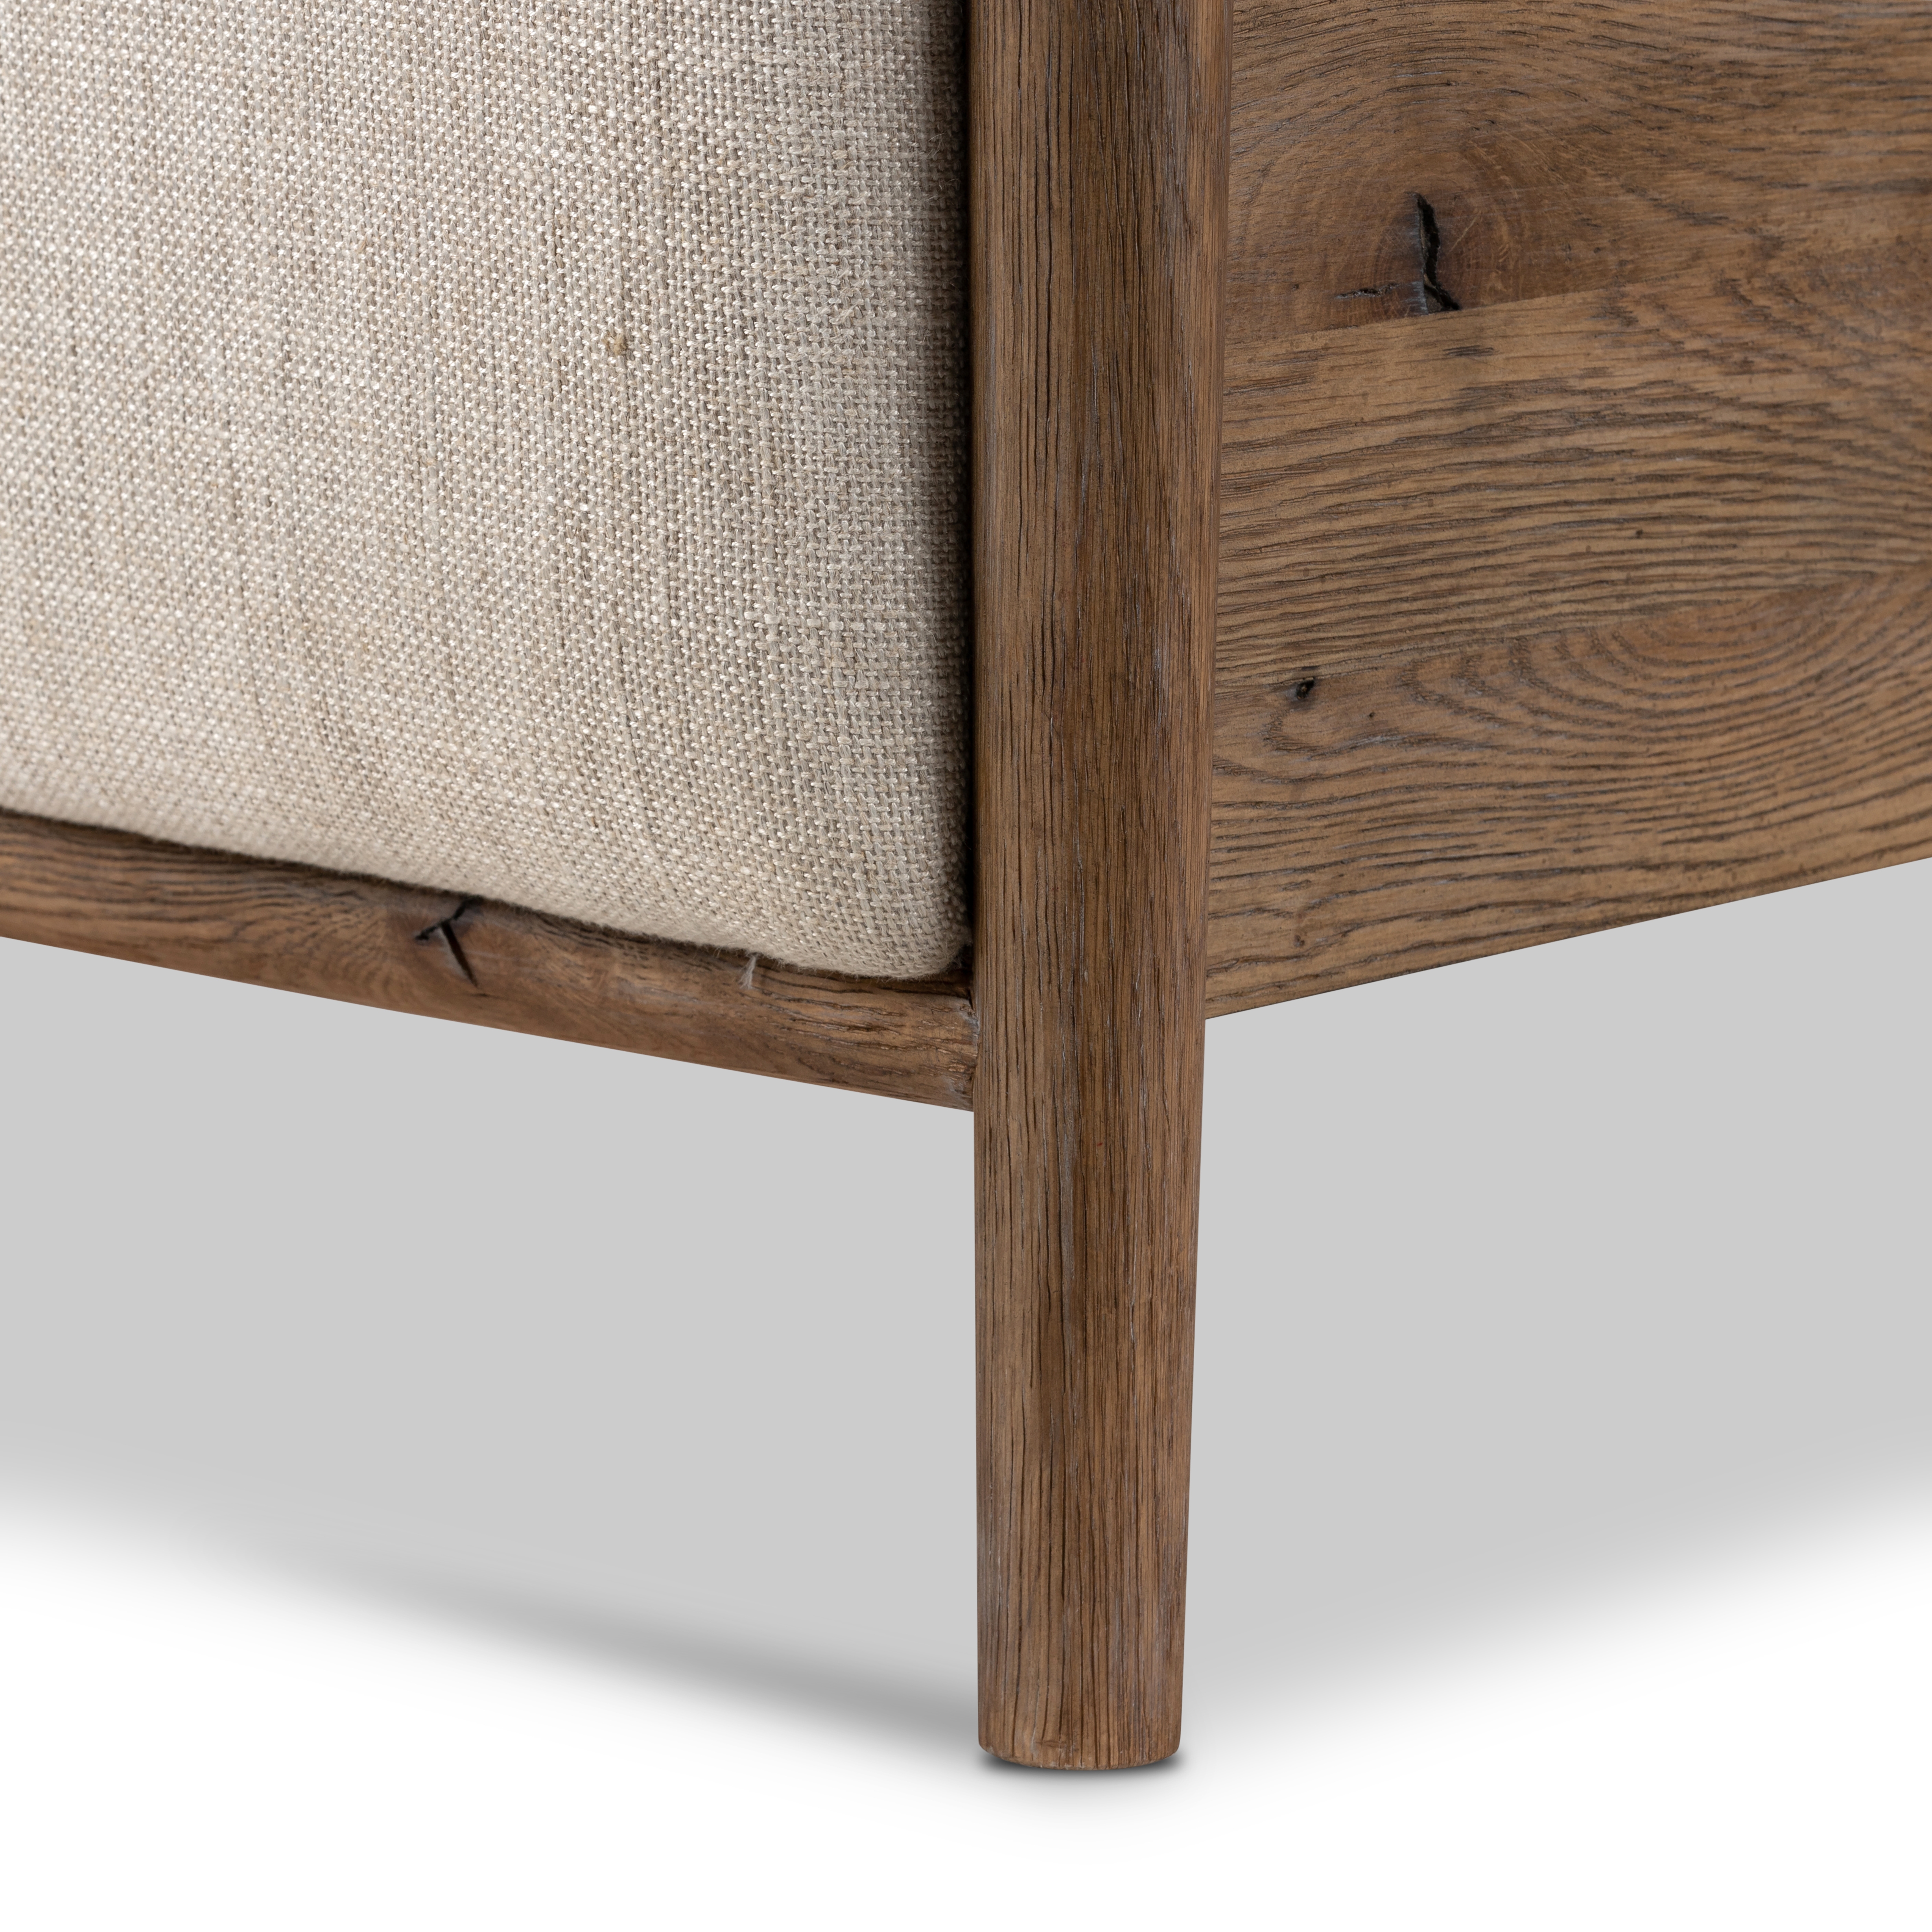 Glenview Bed-Weathered Oak-King - Image 9